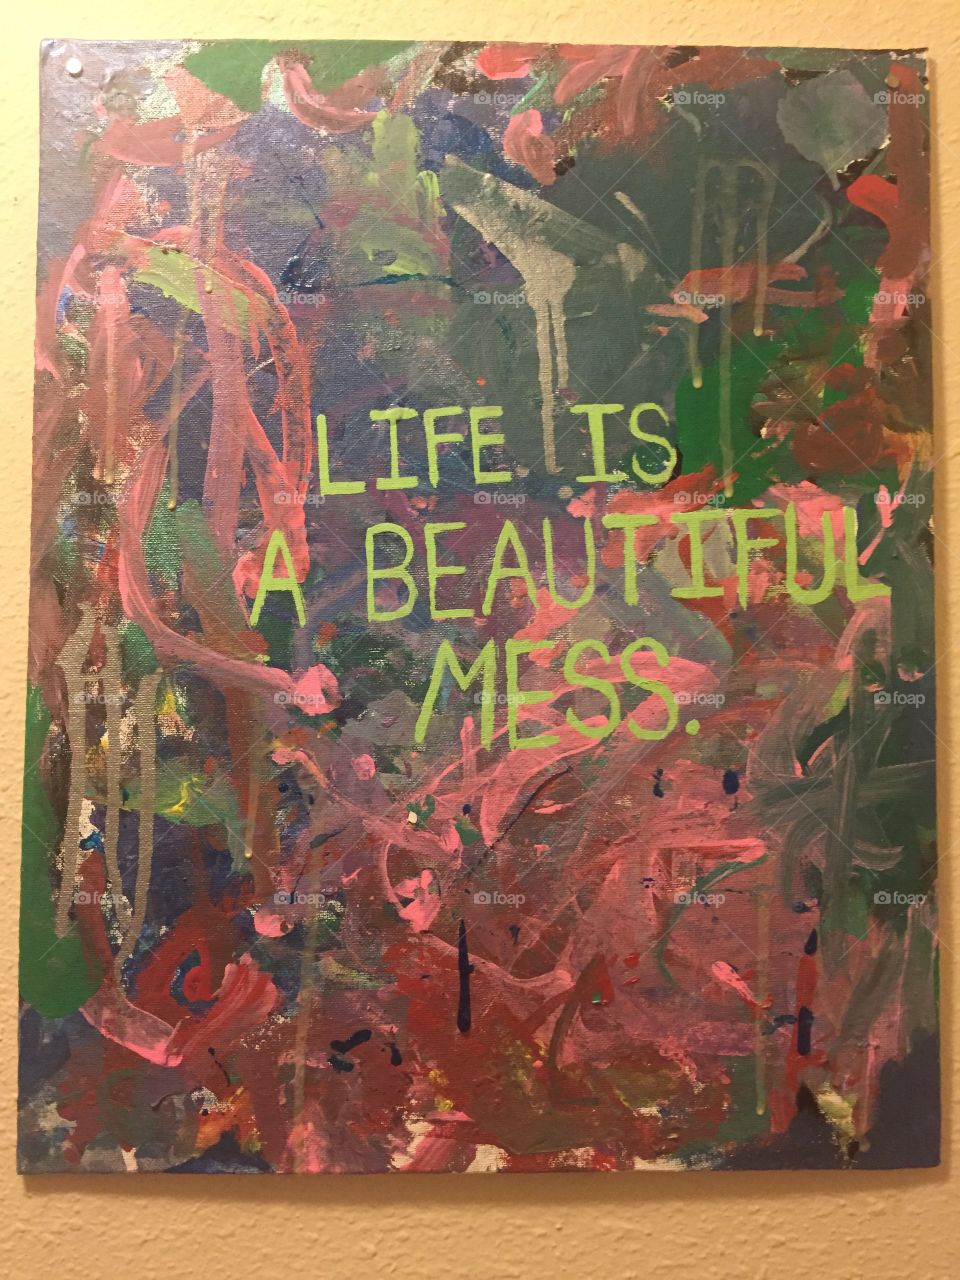 Life is A Beautiful Mess 

(Painted by twin 3 year olds; Words painted by me)